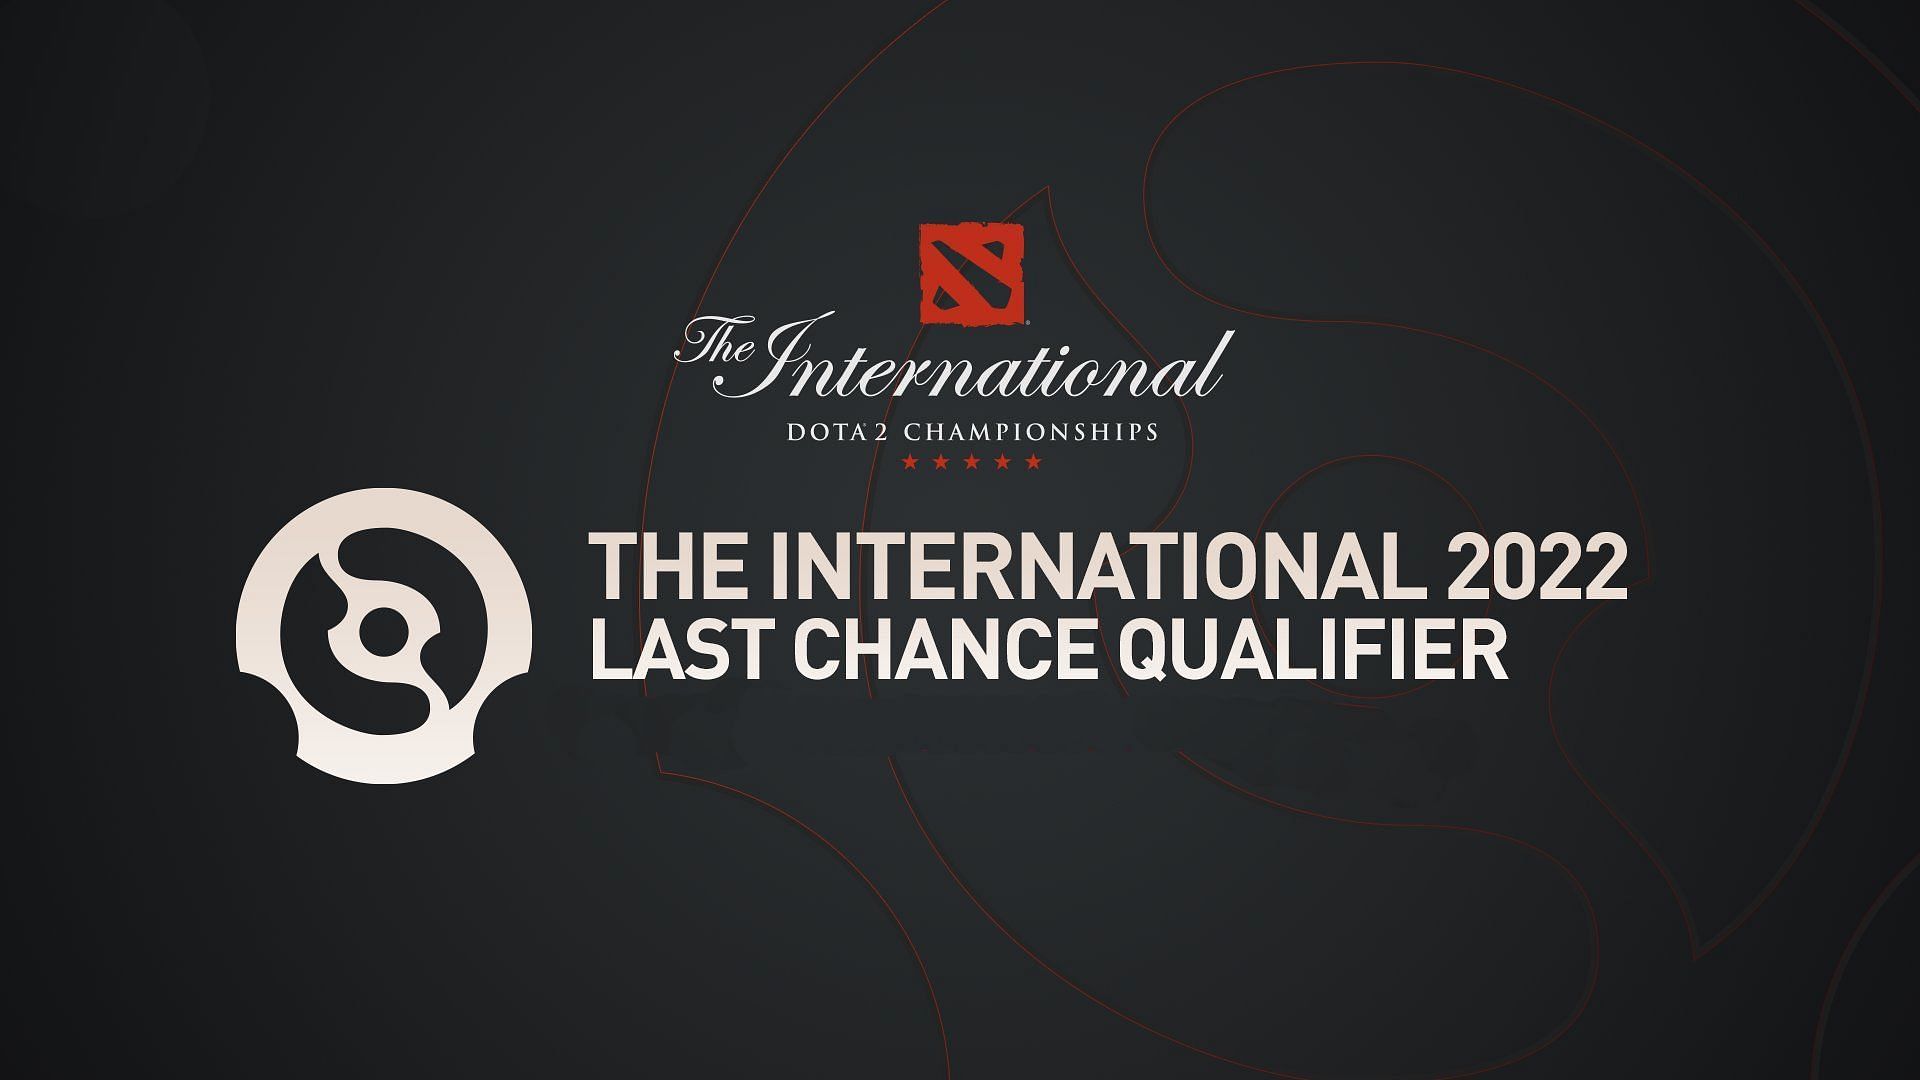 DOTA 2 The International 11 Last Chance Qualifier Schedule, participating teams, where to watch and more